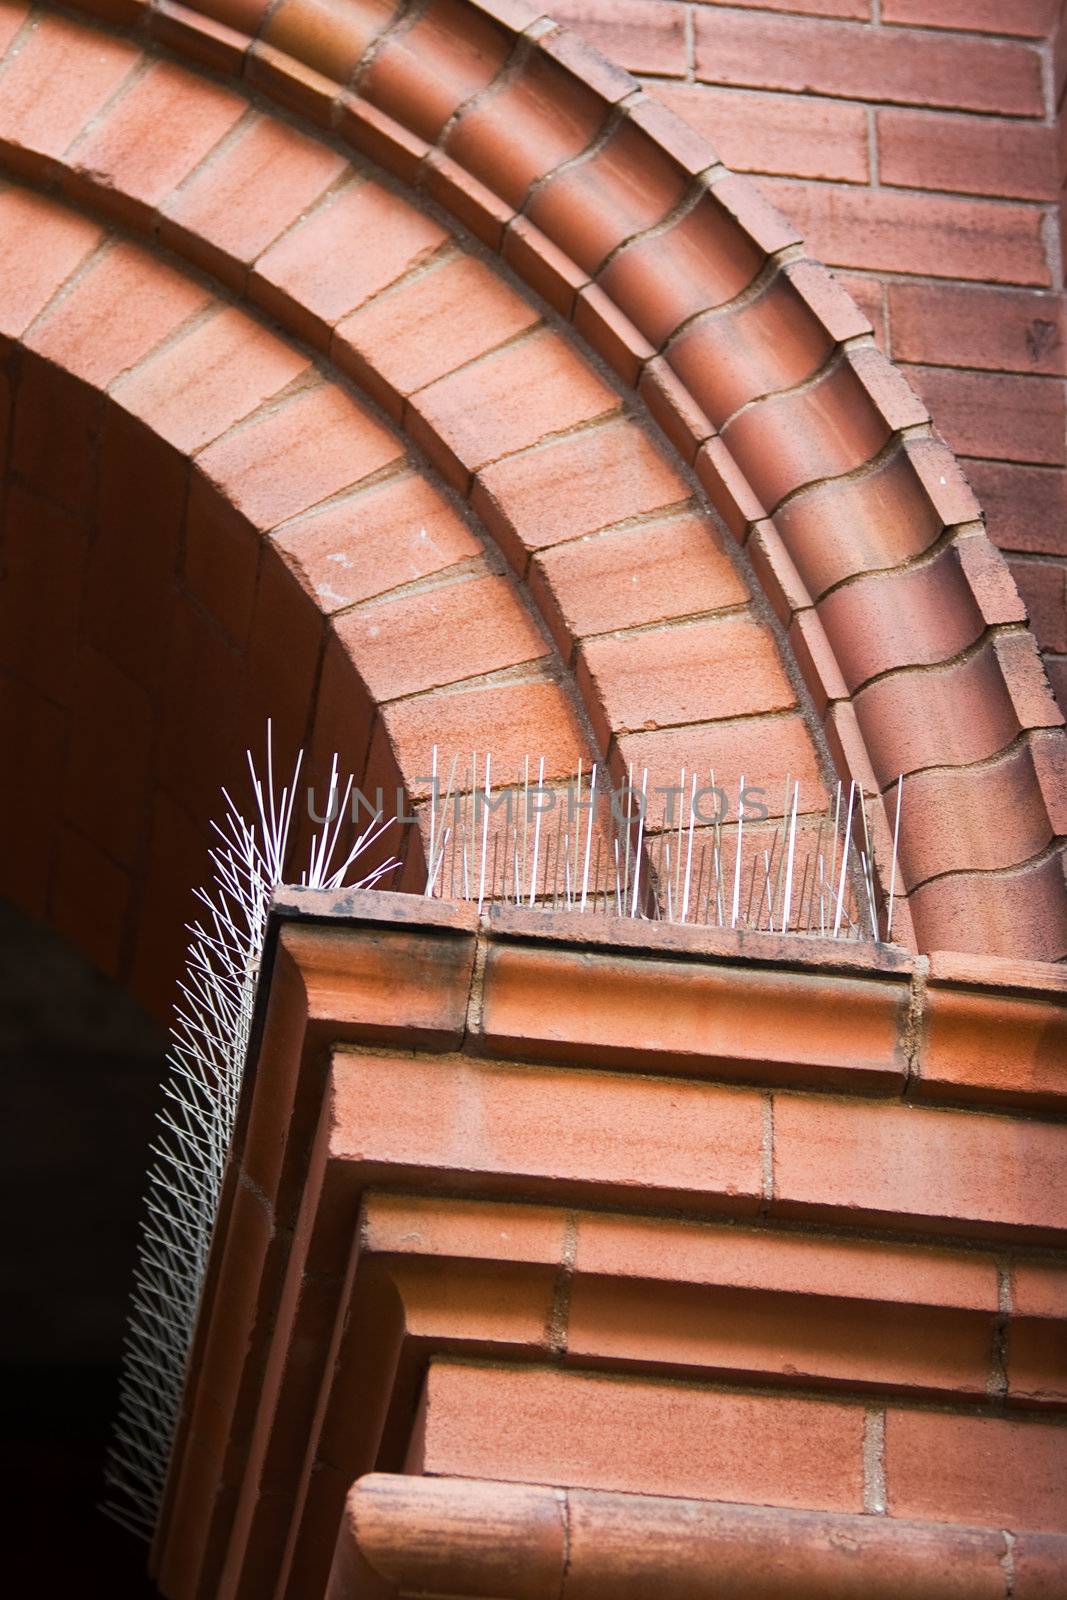 The corner of an arch entranceway, with focus on the spikes which prevent birds from perching near.